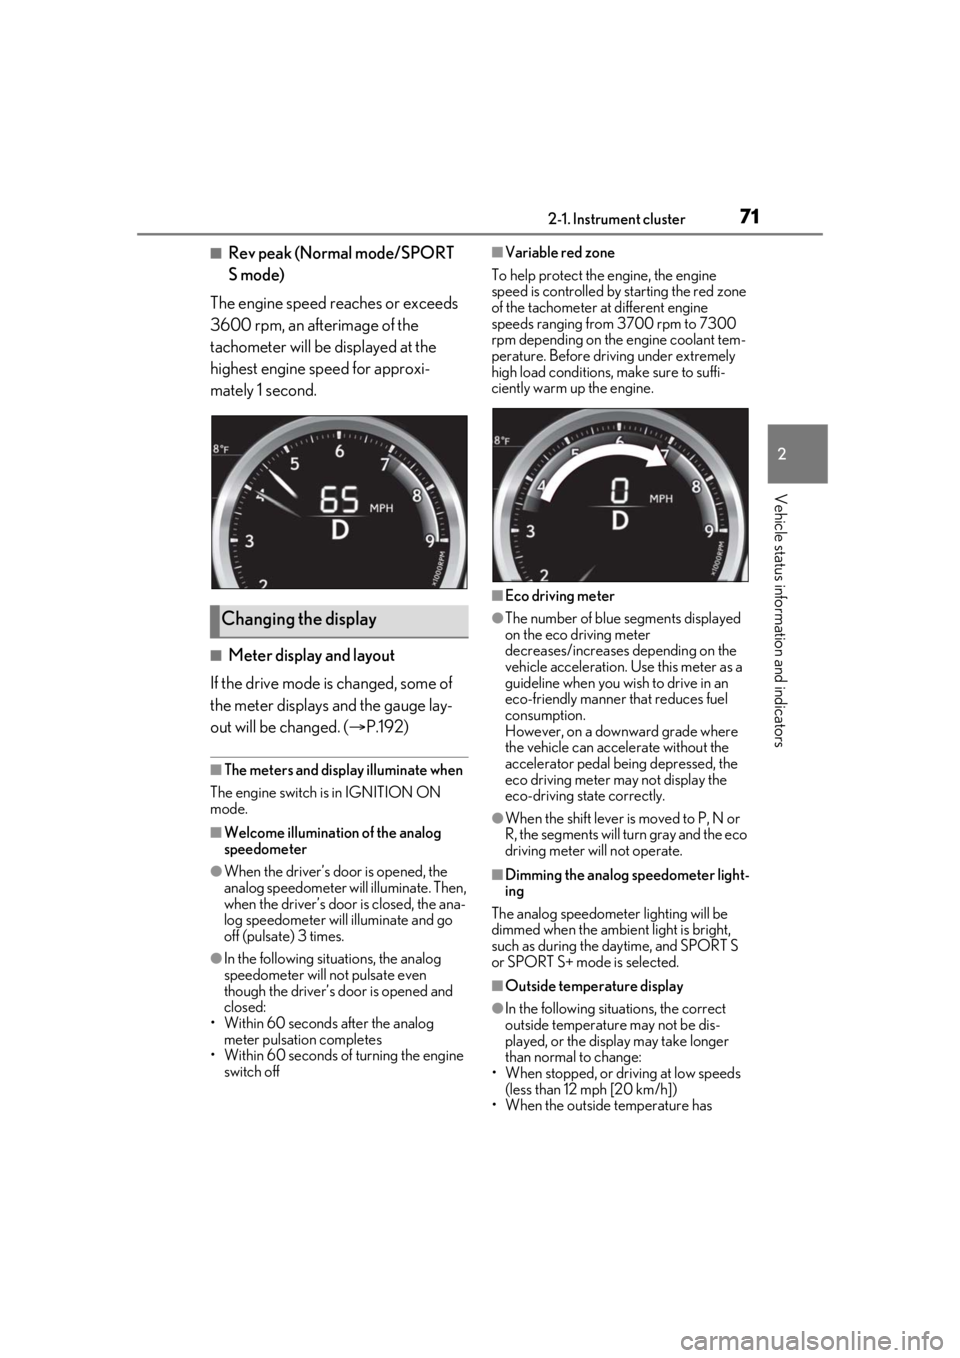 LEXUS RCF 2021  Owners Manual 712-1. Instrument cluster
2
Vehicle status information and indicators
■Rev peak (Normal mode/SPORT 
S mode)
The engine speed reaches or exceeds 
3600 rpm, an afterimage of the 
tachometer will be di